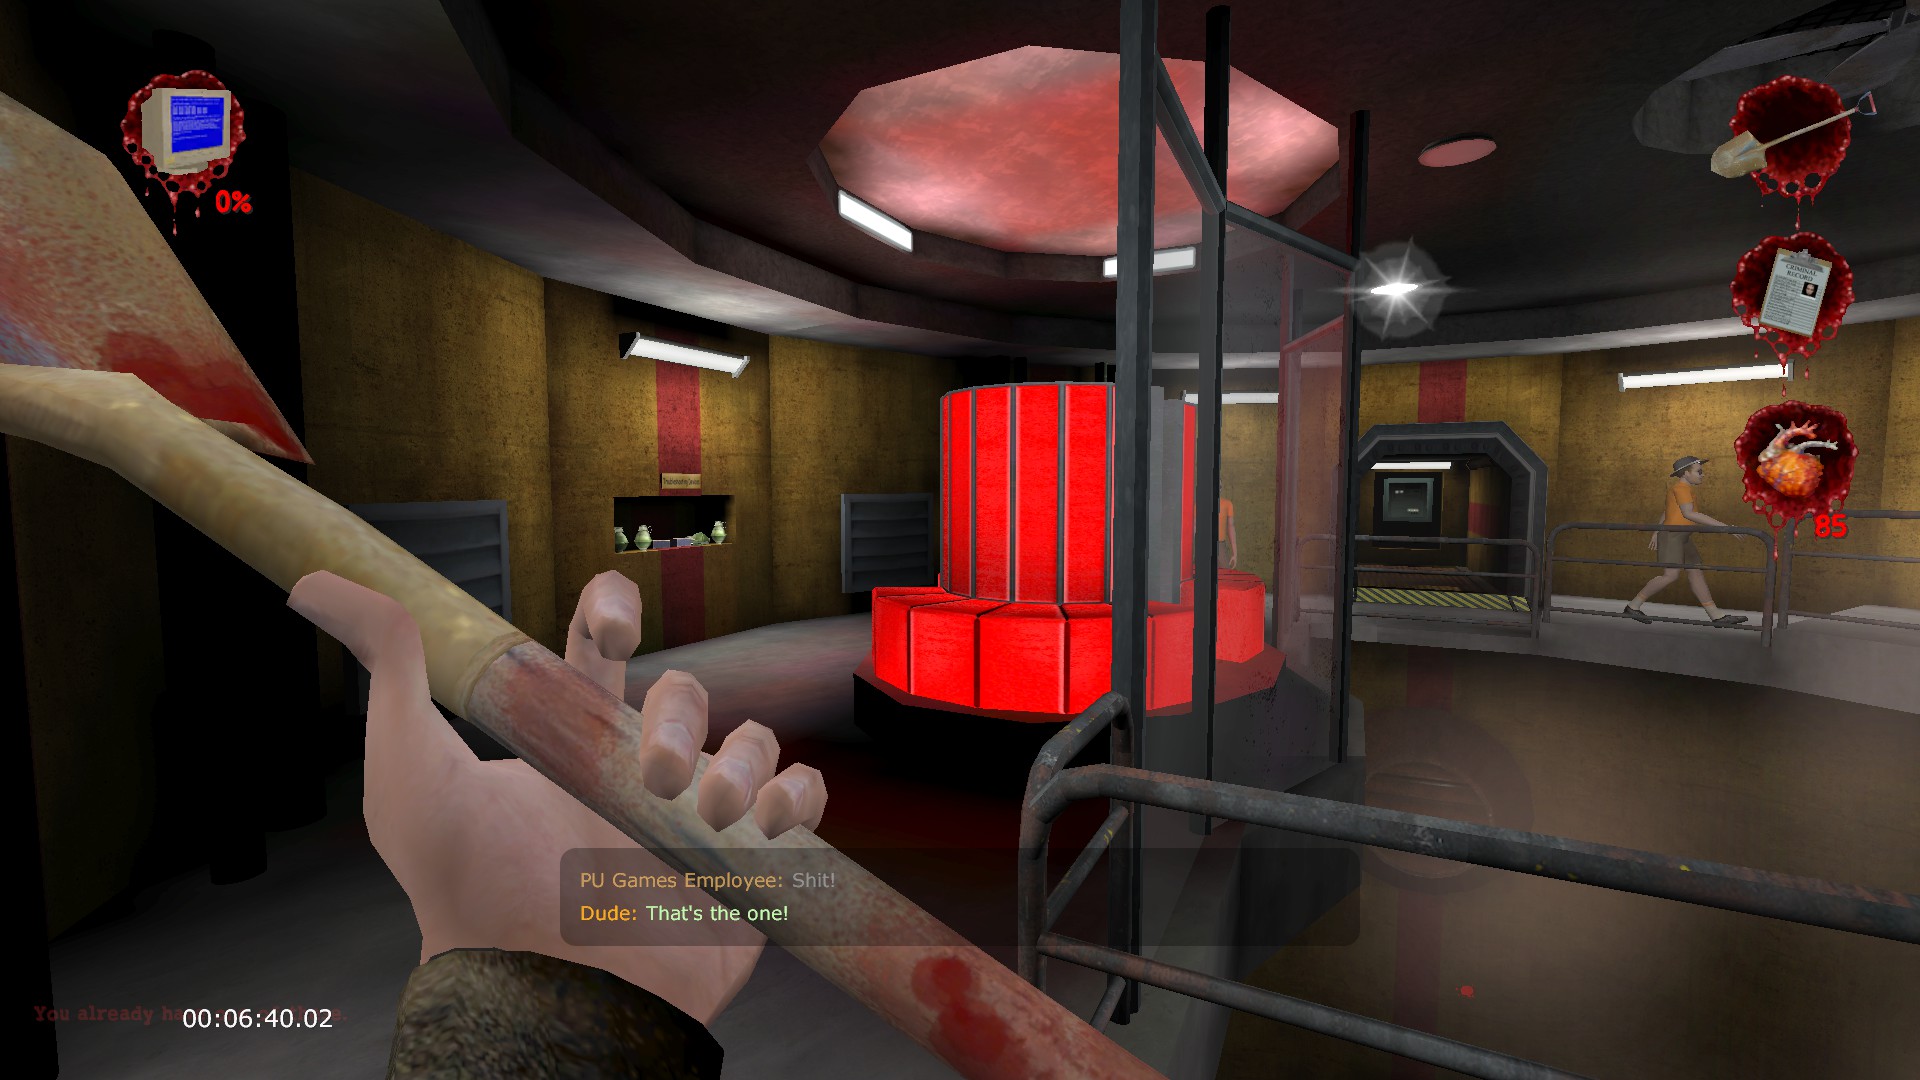 POSTAL 2 - Completing achievement Adderall4All